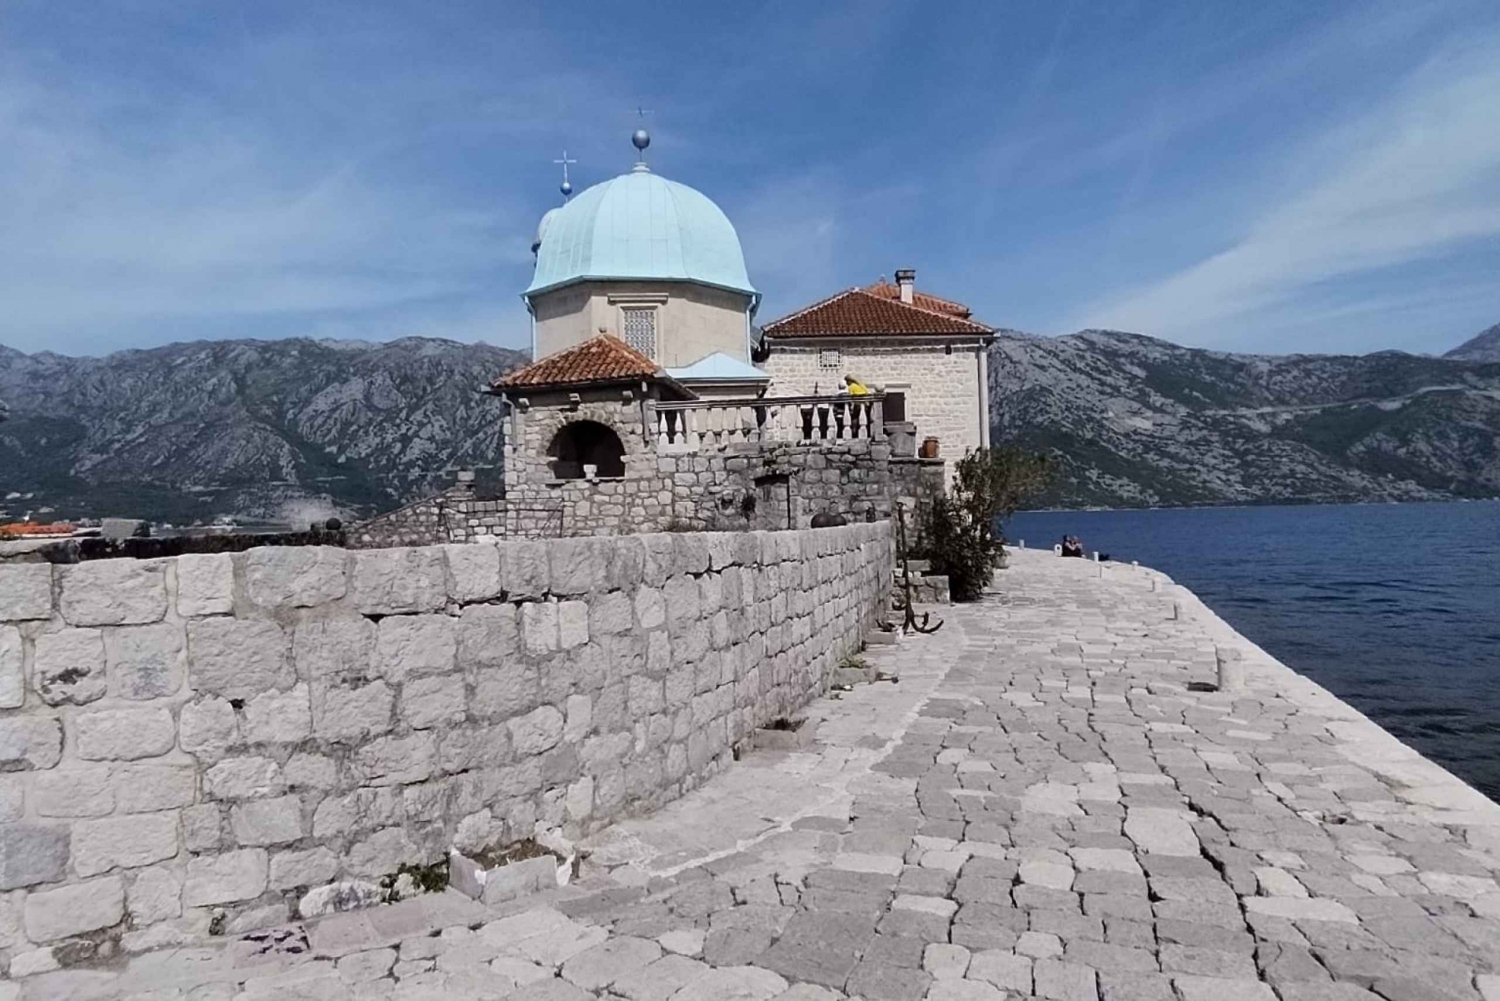 From Dubrovnik to Montenegro: Perast and Kotor